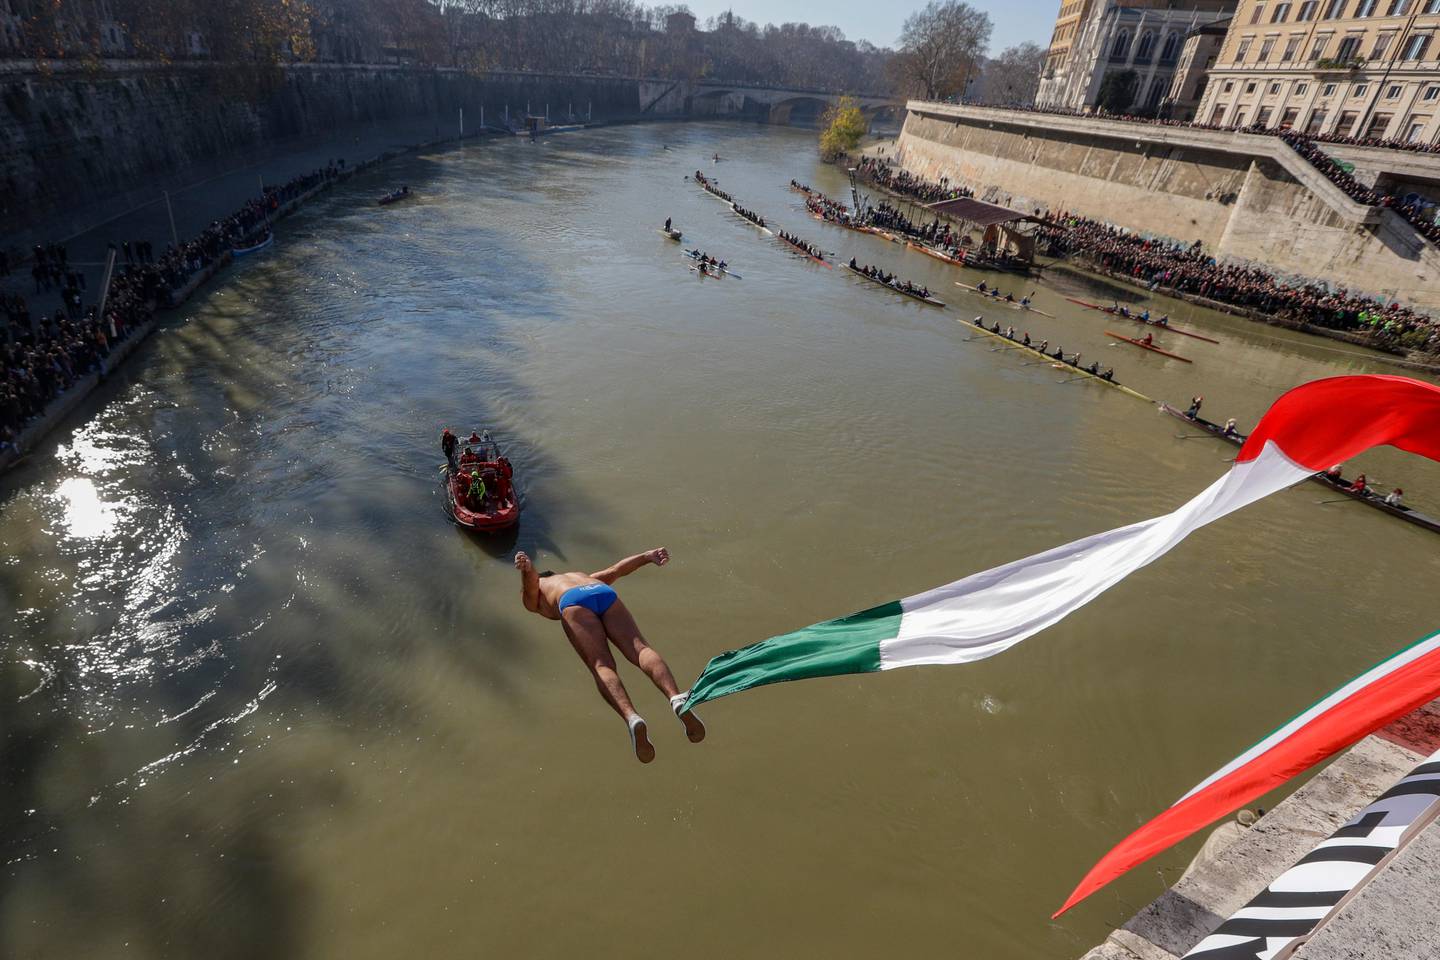 Valter Schirra dives into the Tiber river from the 18 meters (59 feet) high Cavour Bridge in Rome, Wednesday, Jan. 1, 2020. (AP Photo/Andrew Medichini)